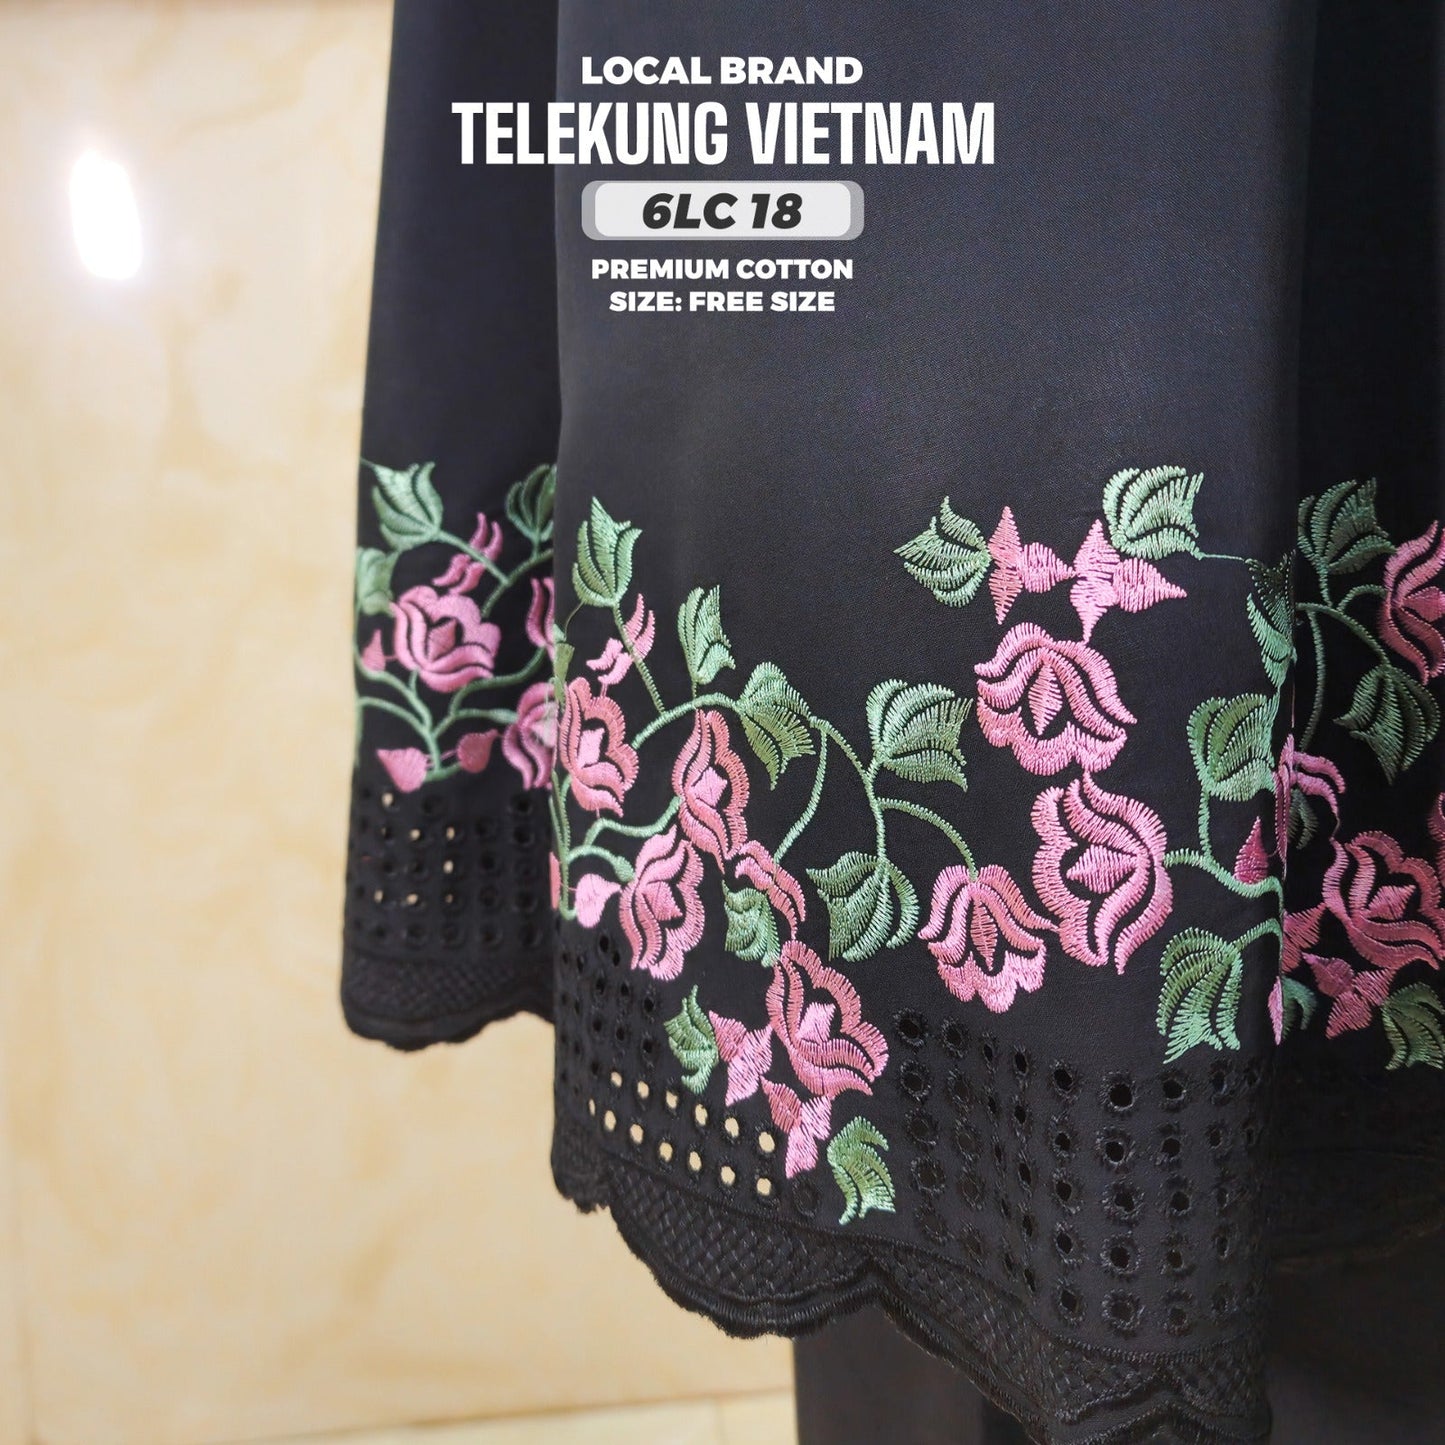 Telekung Local Brand Sulam 3 Collection (6LC)